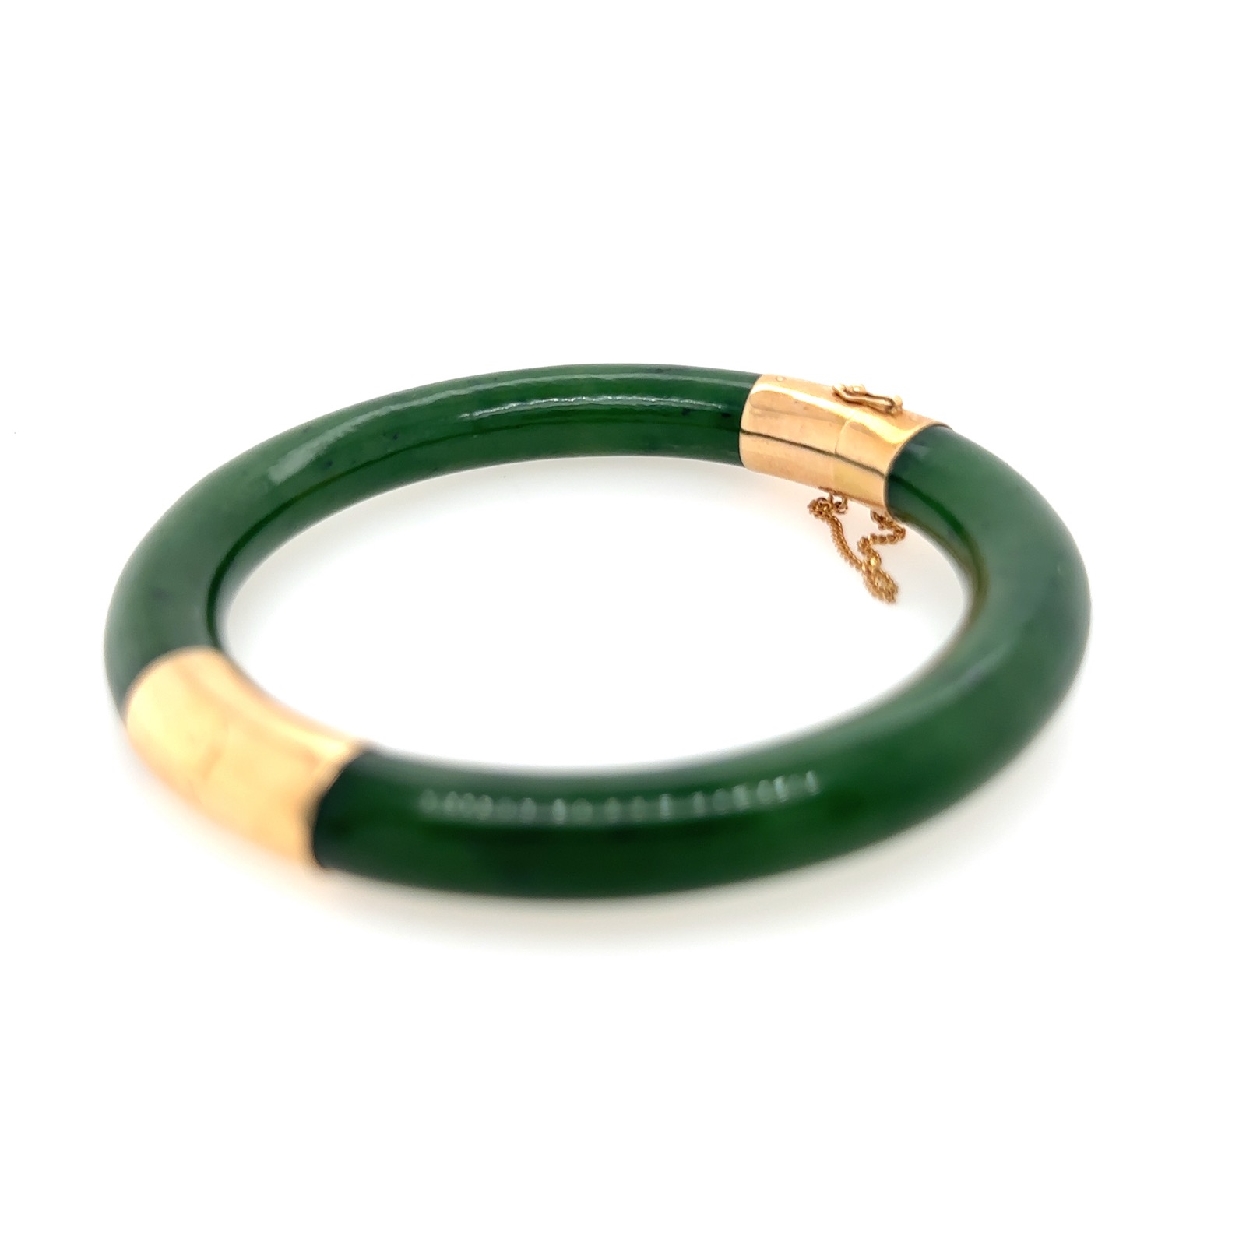 Jade Bracelet with 14K Gold clasp and hinge